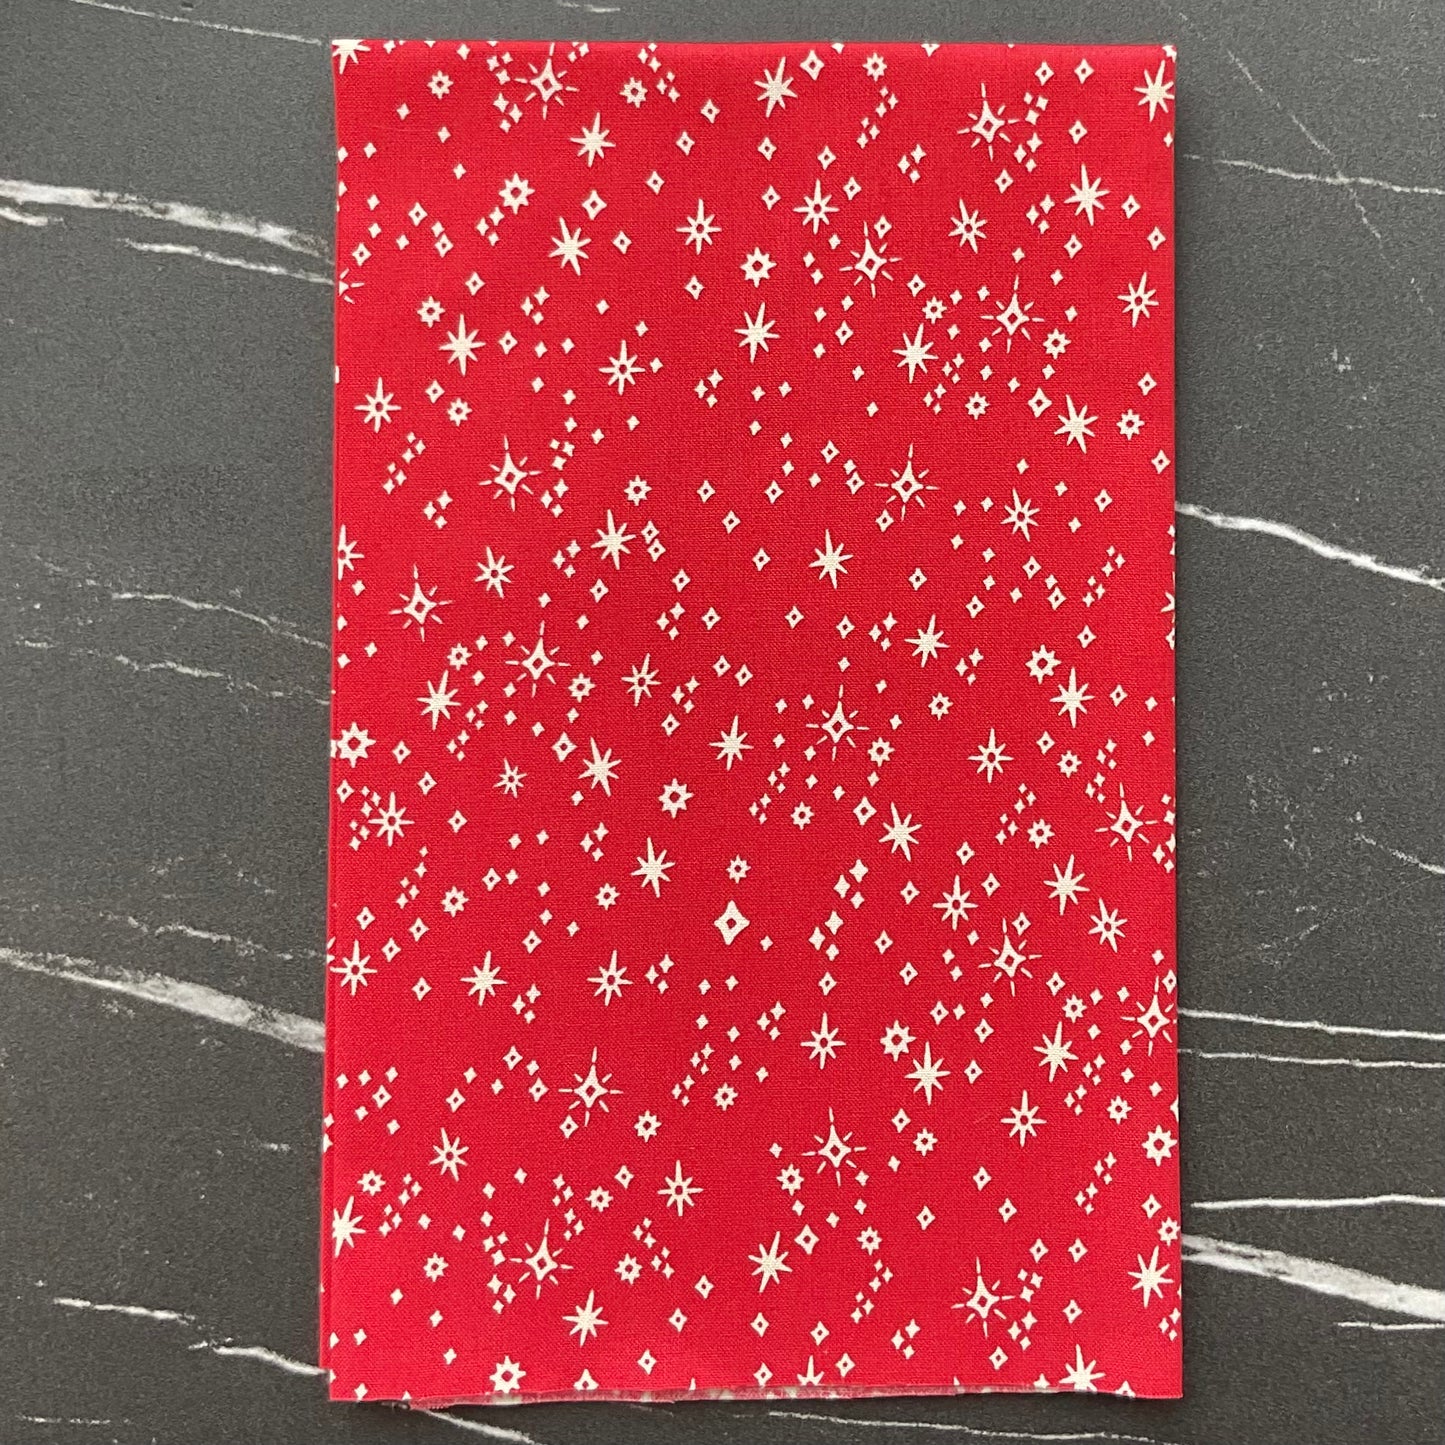 Good News Great Joy by Fancy That Design House - Starry Snowfall - Holly Red 45565 13